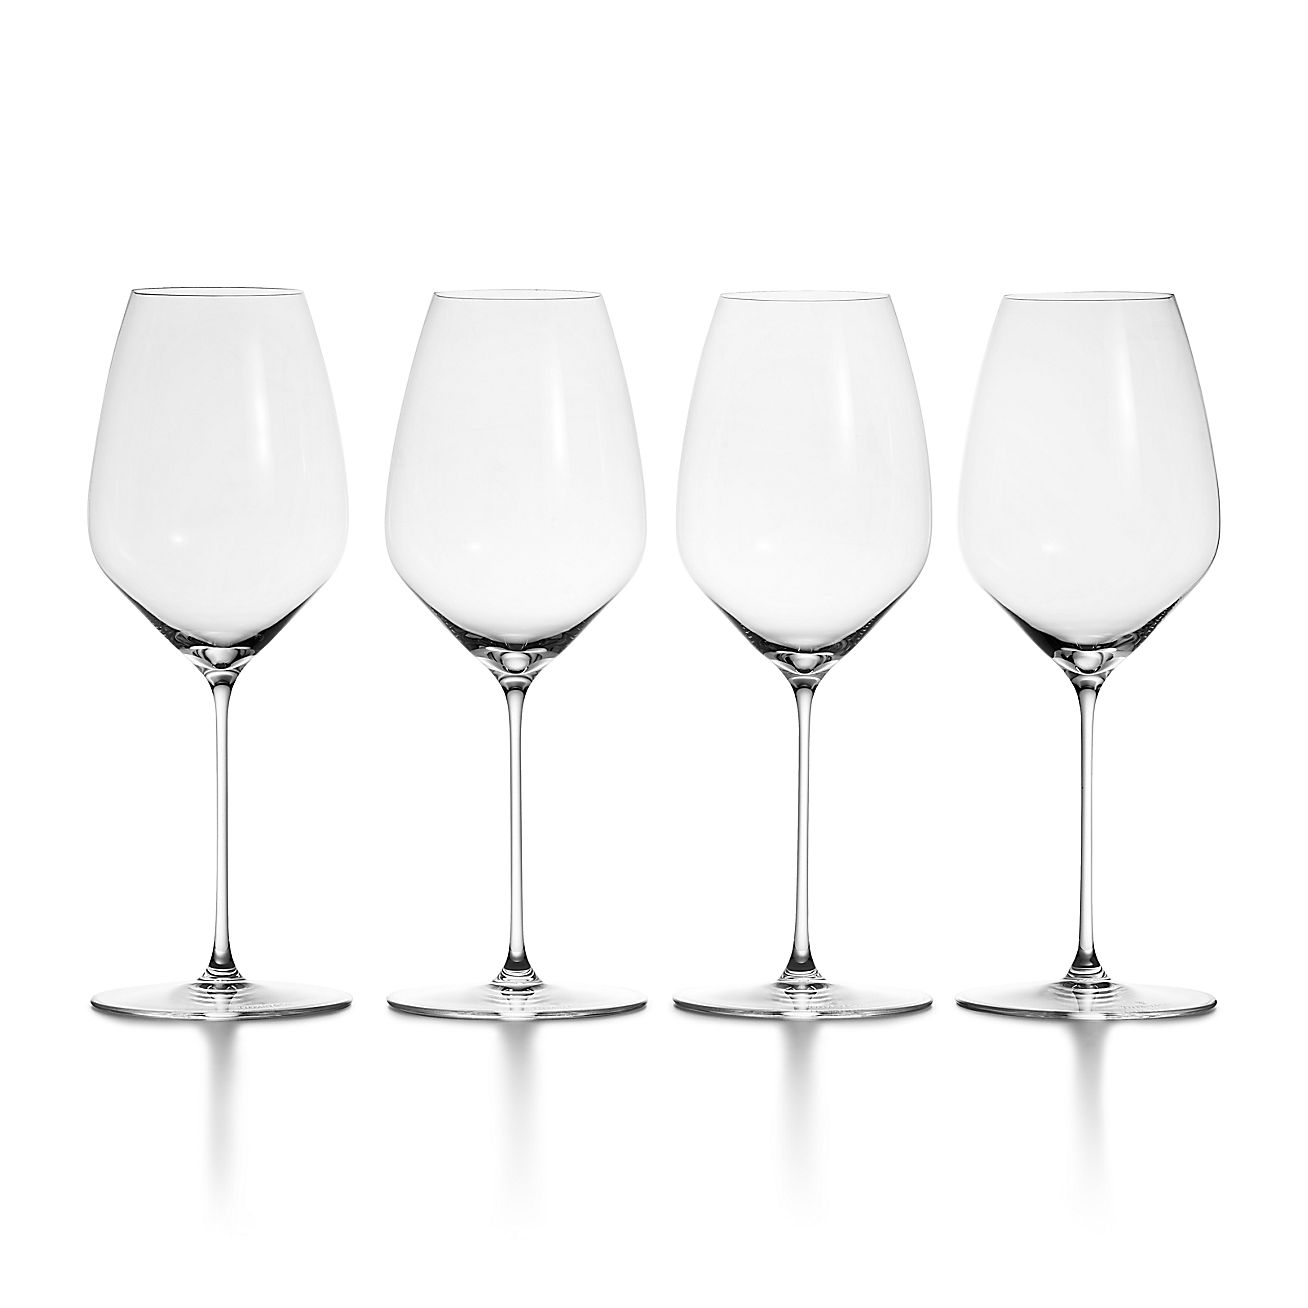 Stunning Set of 6 Crystal Wine Glasses, Boxed 